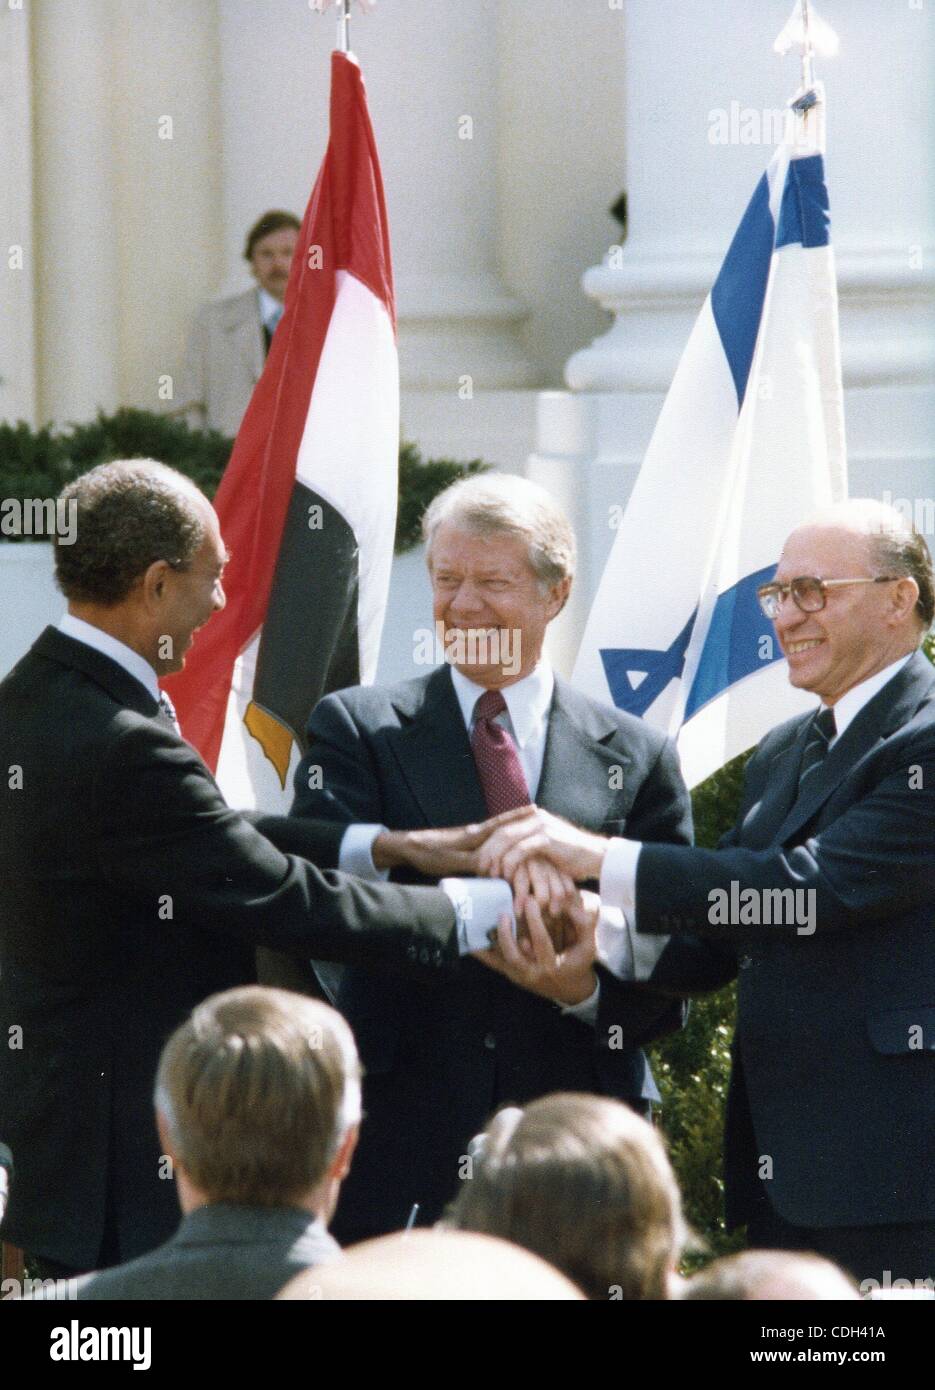 Jan. 27, 2011 - Washington, DISTRICT OF COLUMBIA, U.S. - (FILE) A file picture dated 26 March 1979 shows US President Jimmy Carter (C) with Israeli Prime Minister Menachem Begin (R) and Egyptian President Anwar al Sadat during the signing ceremony for a peace agreement between Egypt and Israel at th Stock Photo